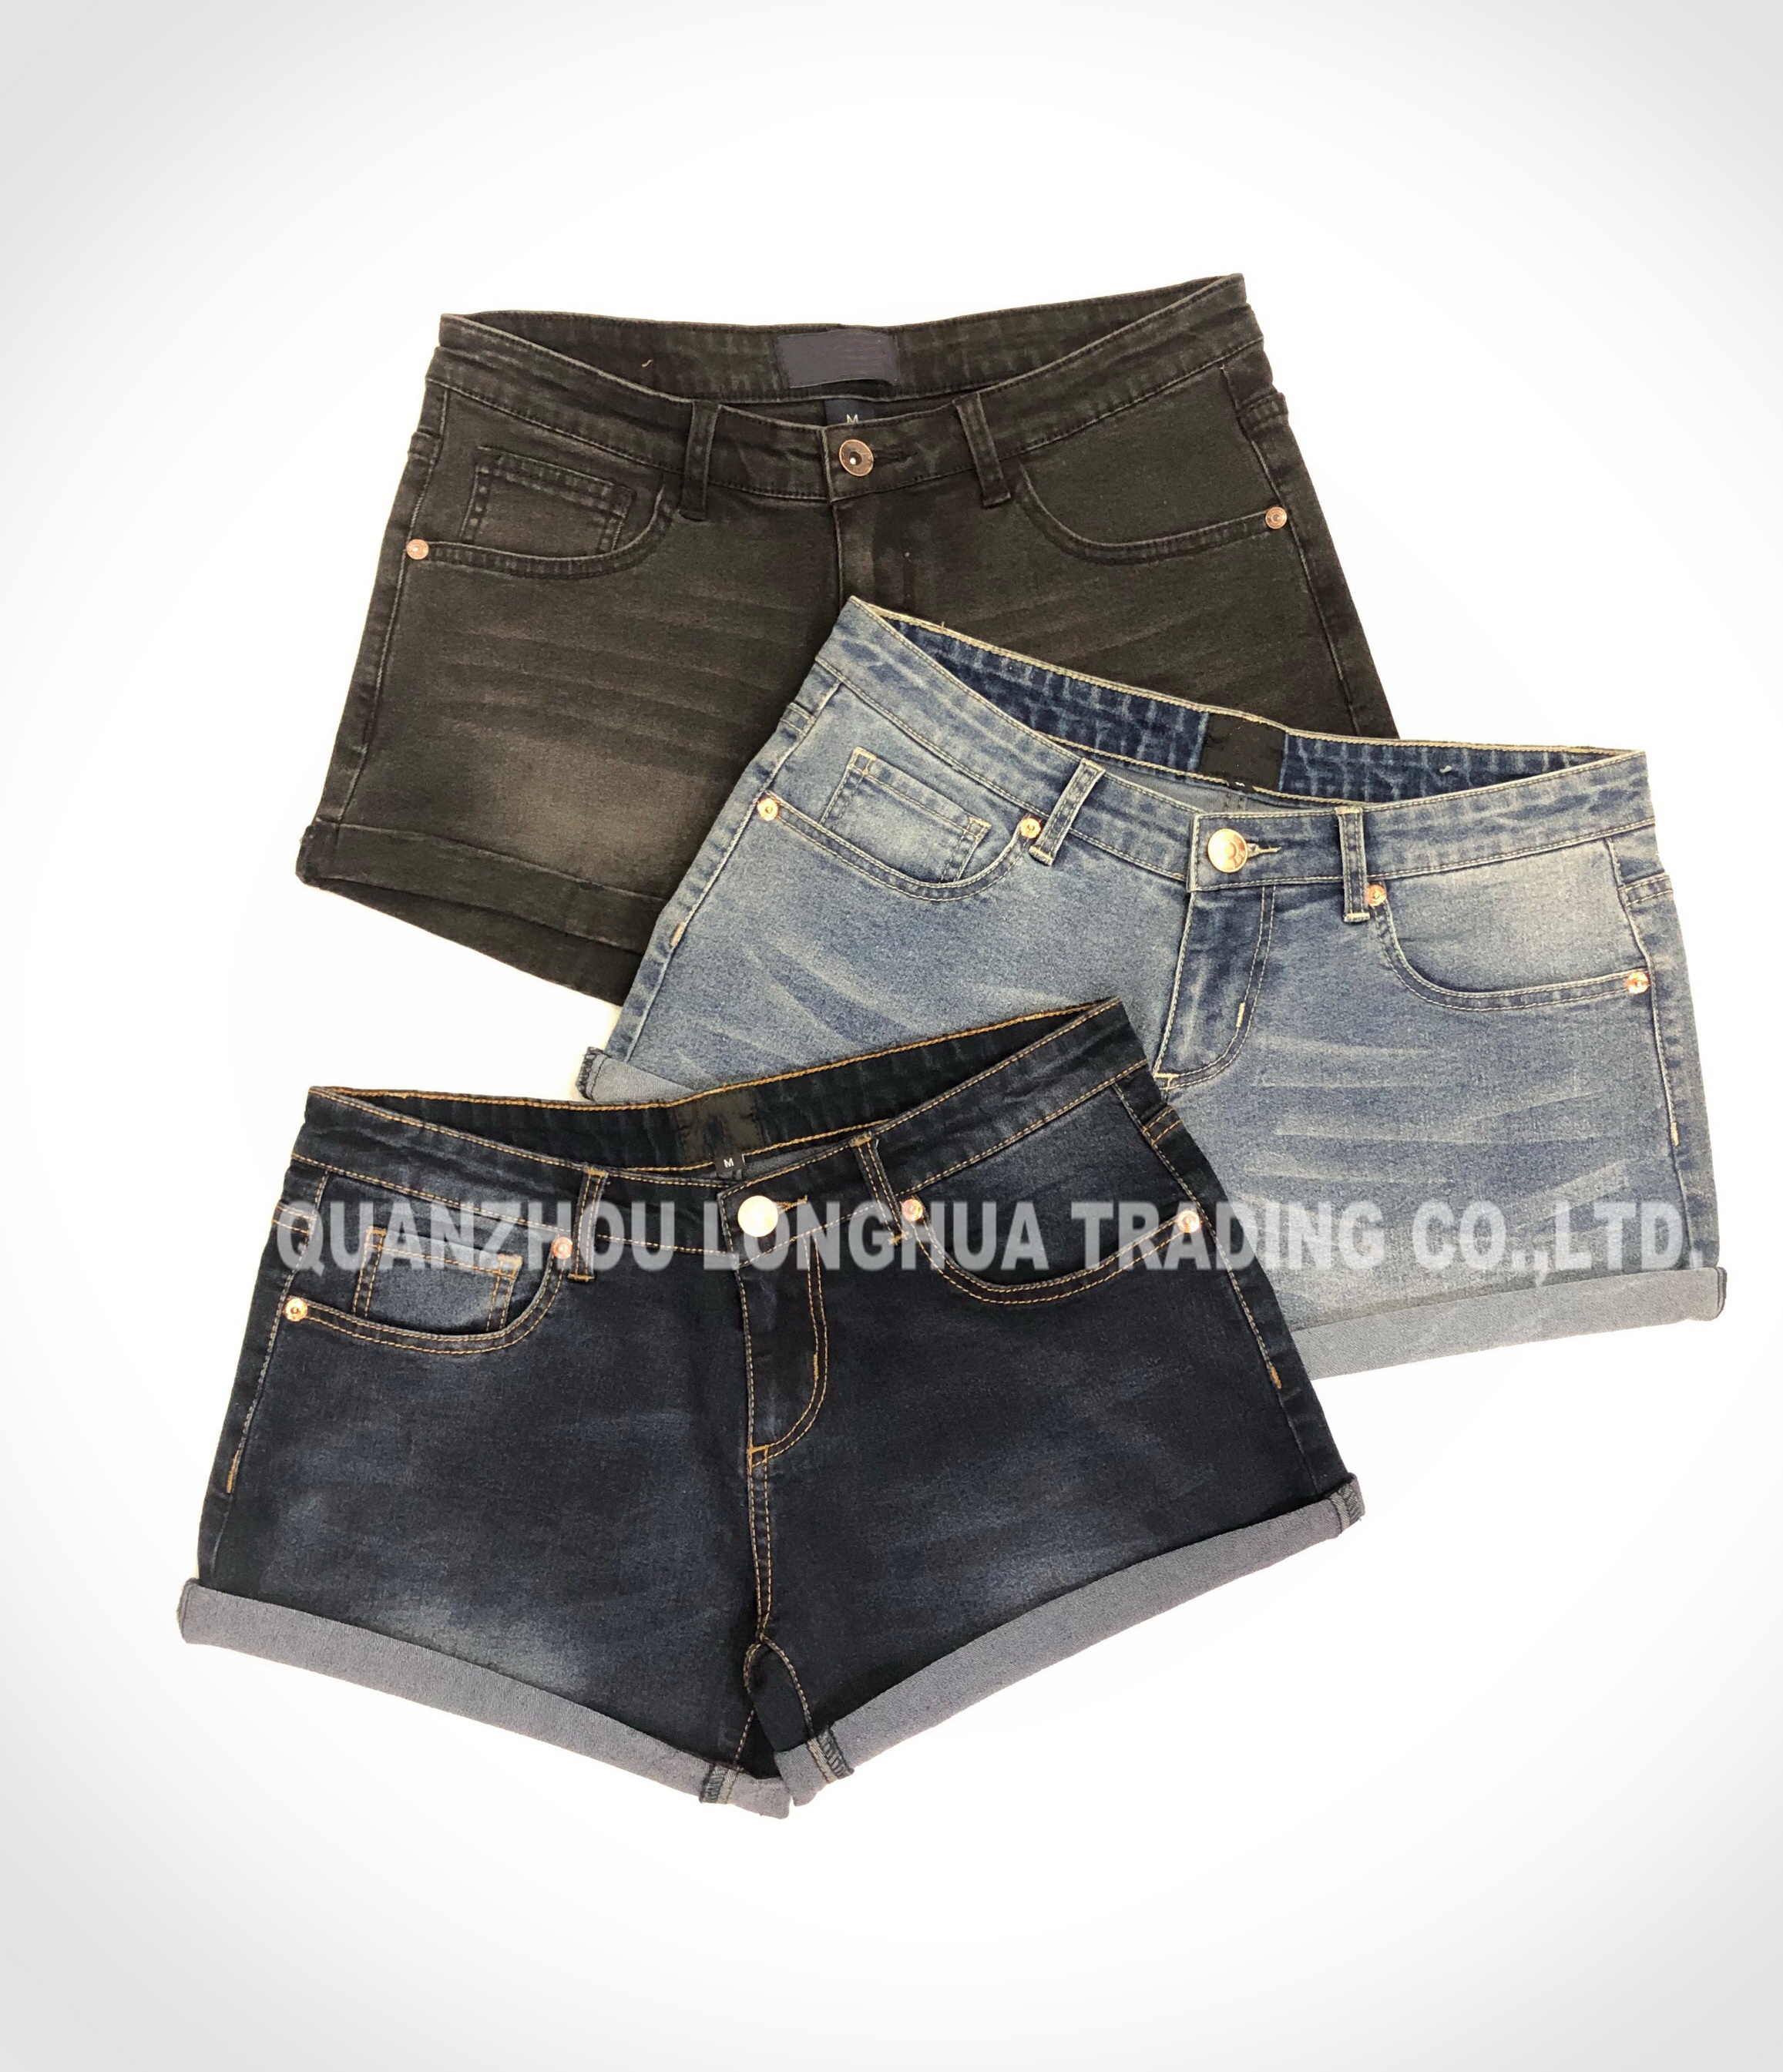 Ladys and Girls Denim Shorts Jeans Apparel Trousers Fashion Cotton Spandex